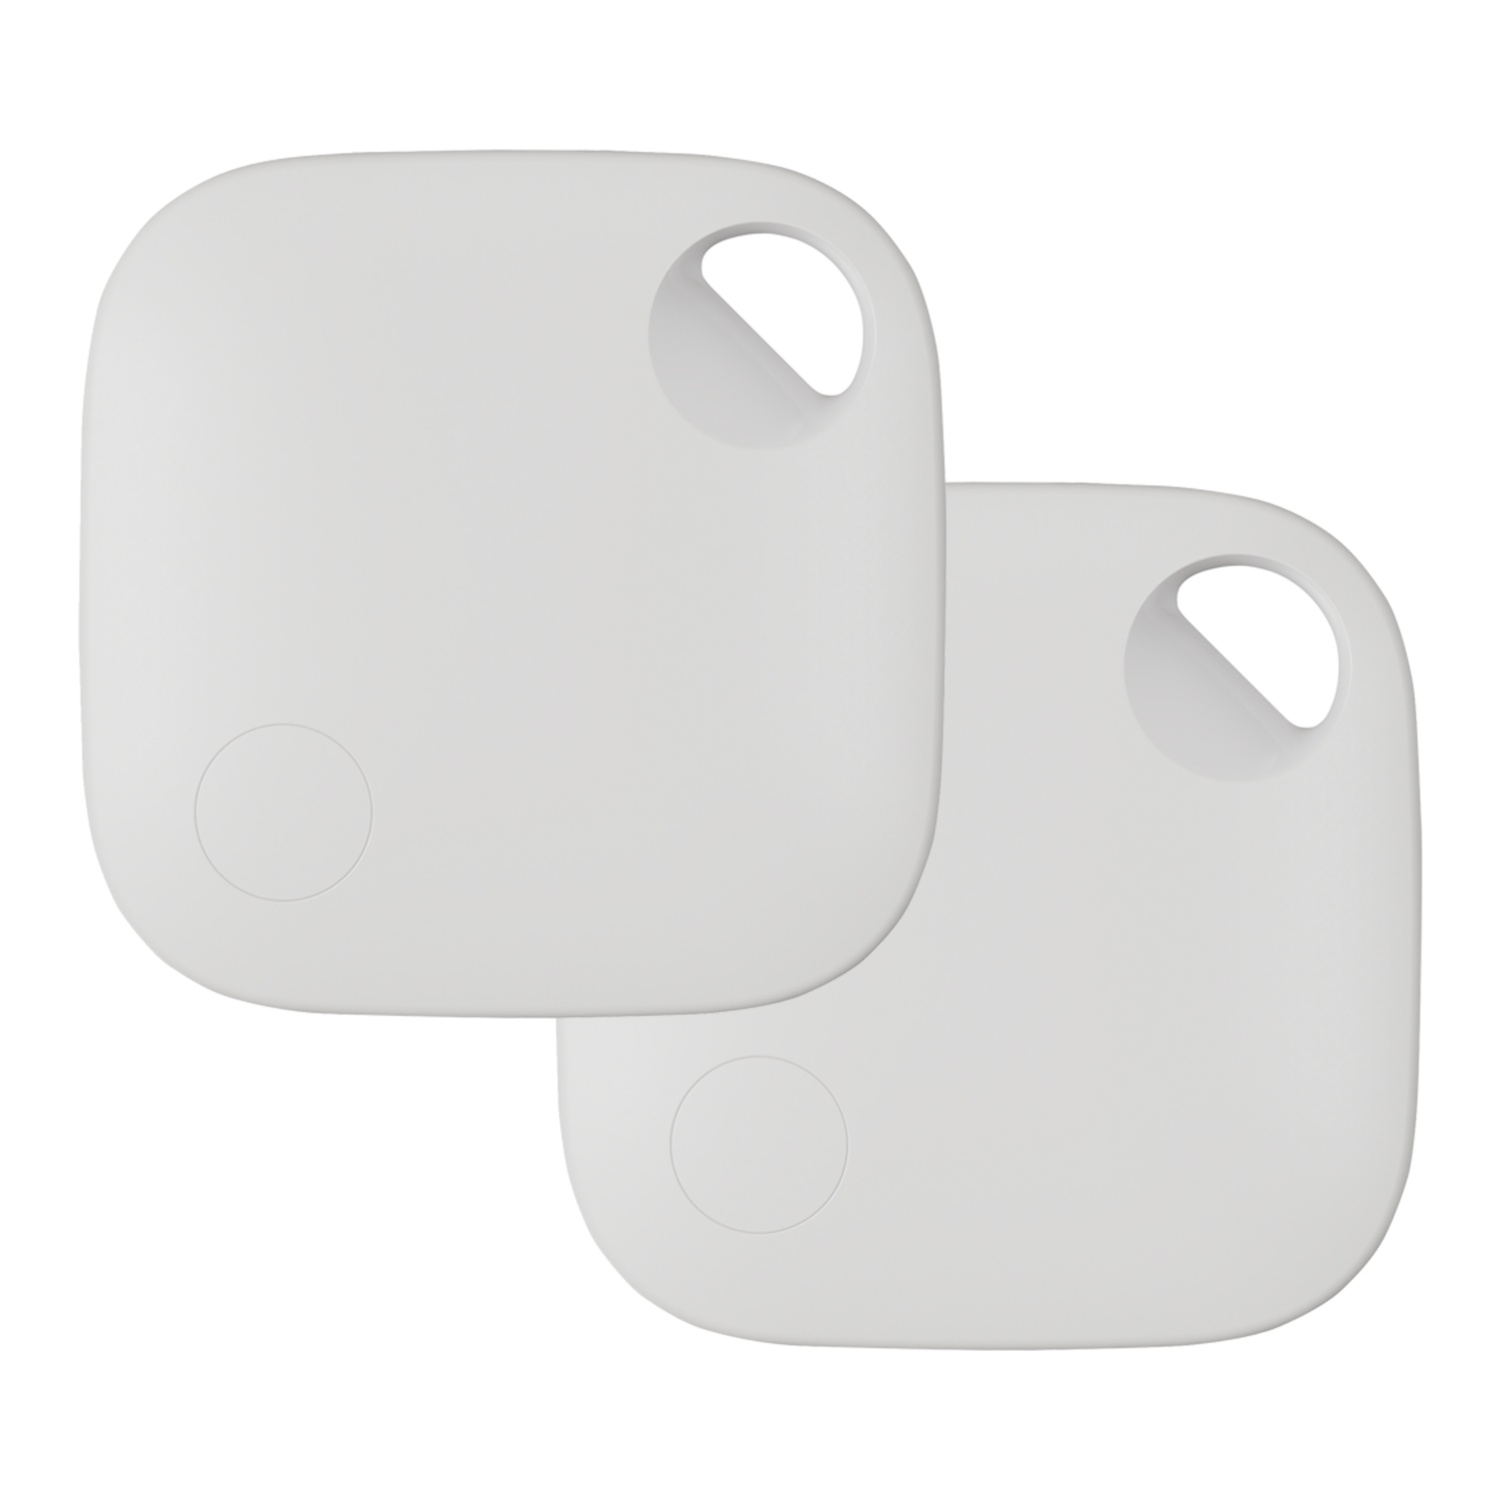 MAGINON Smart Tags, 2er-Packung